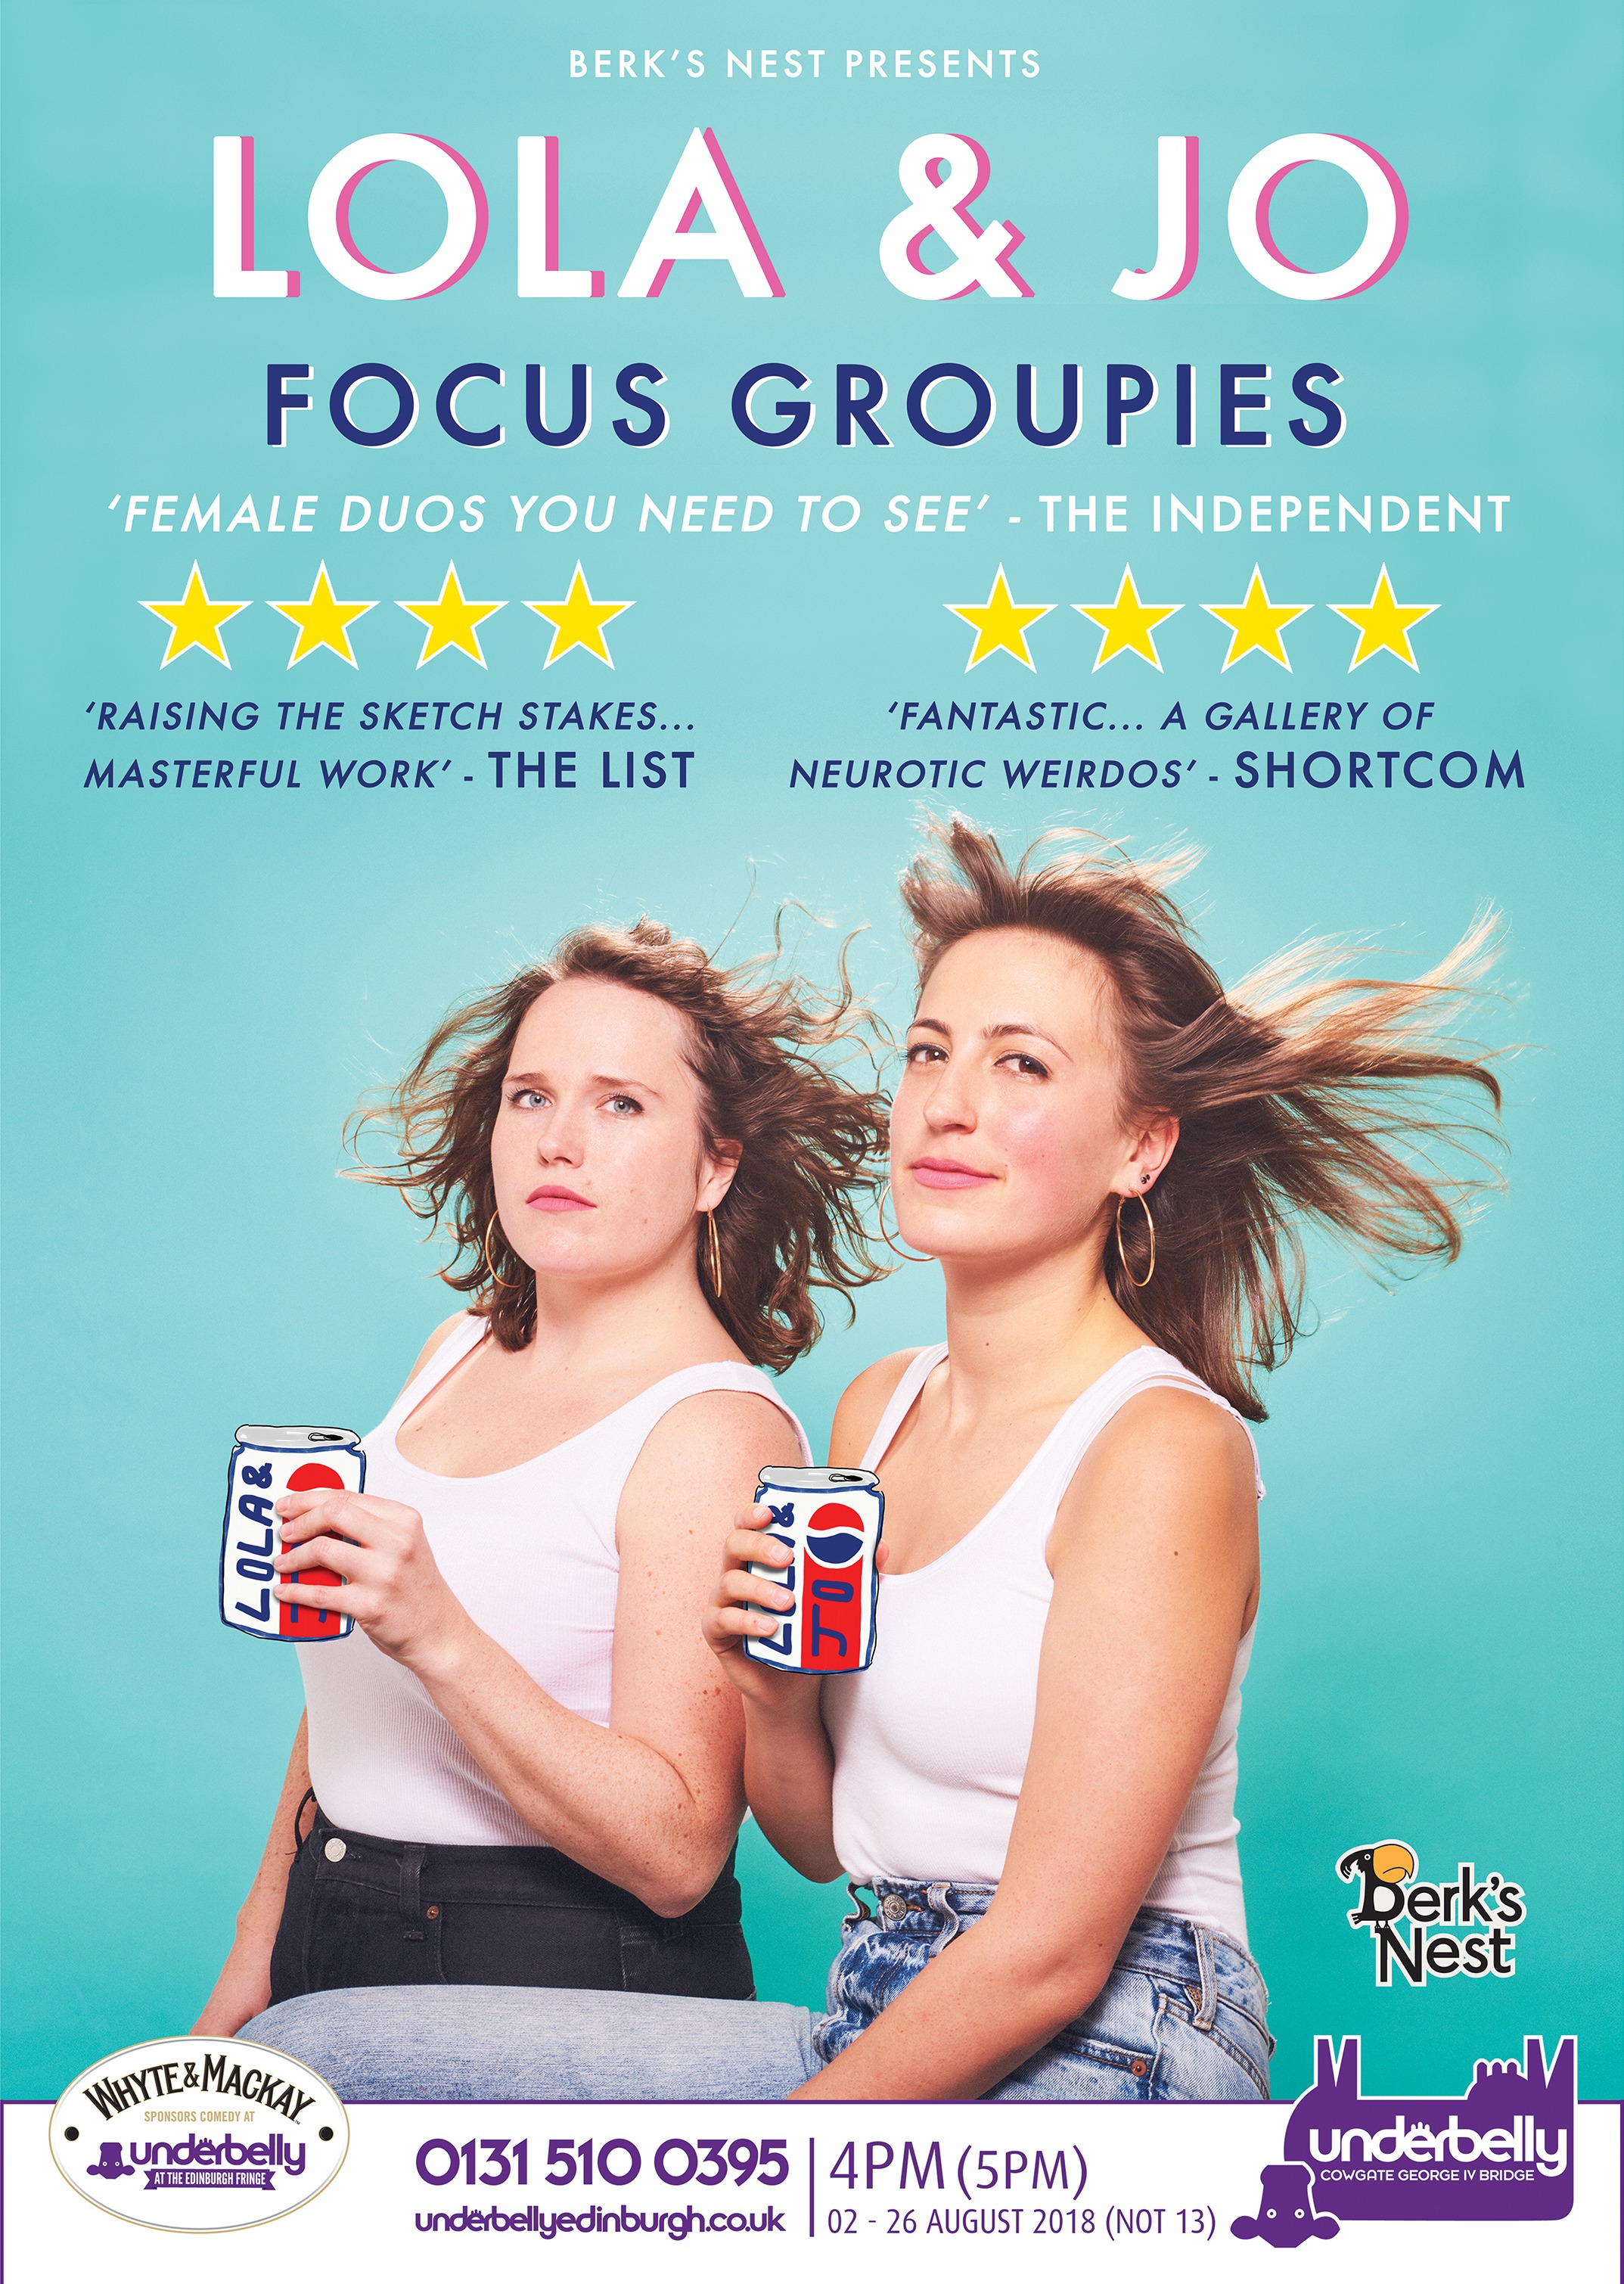 The poster for Lola and Jo: Focus Groupies